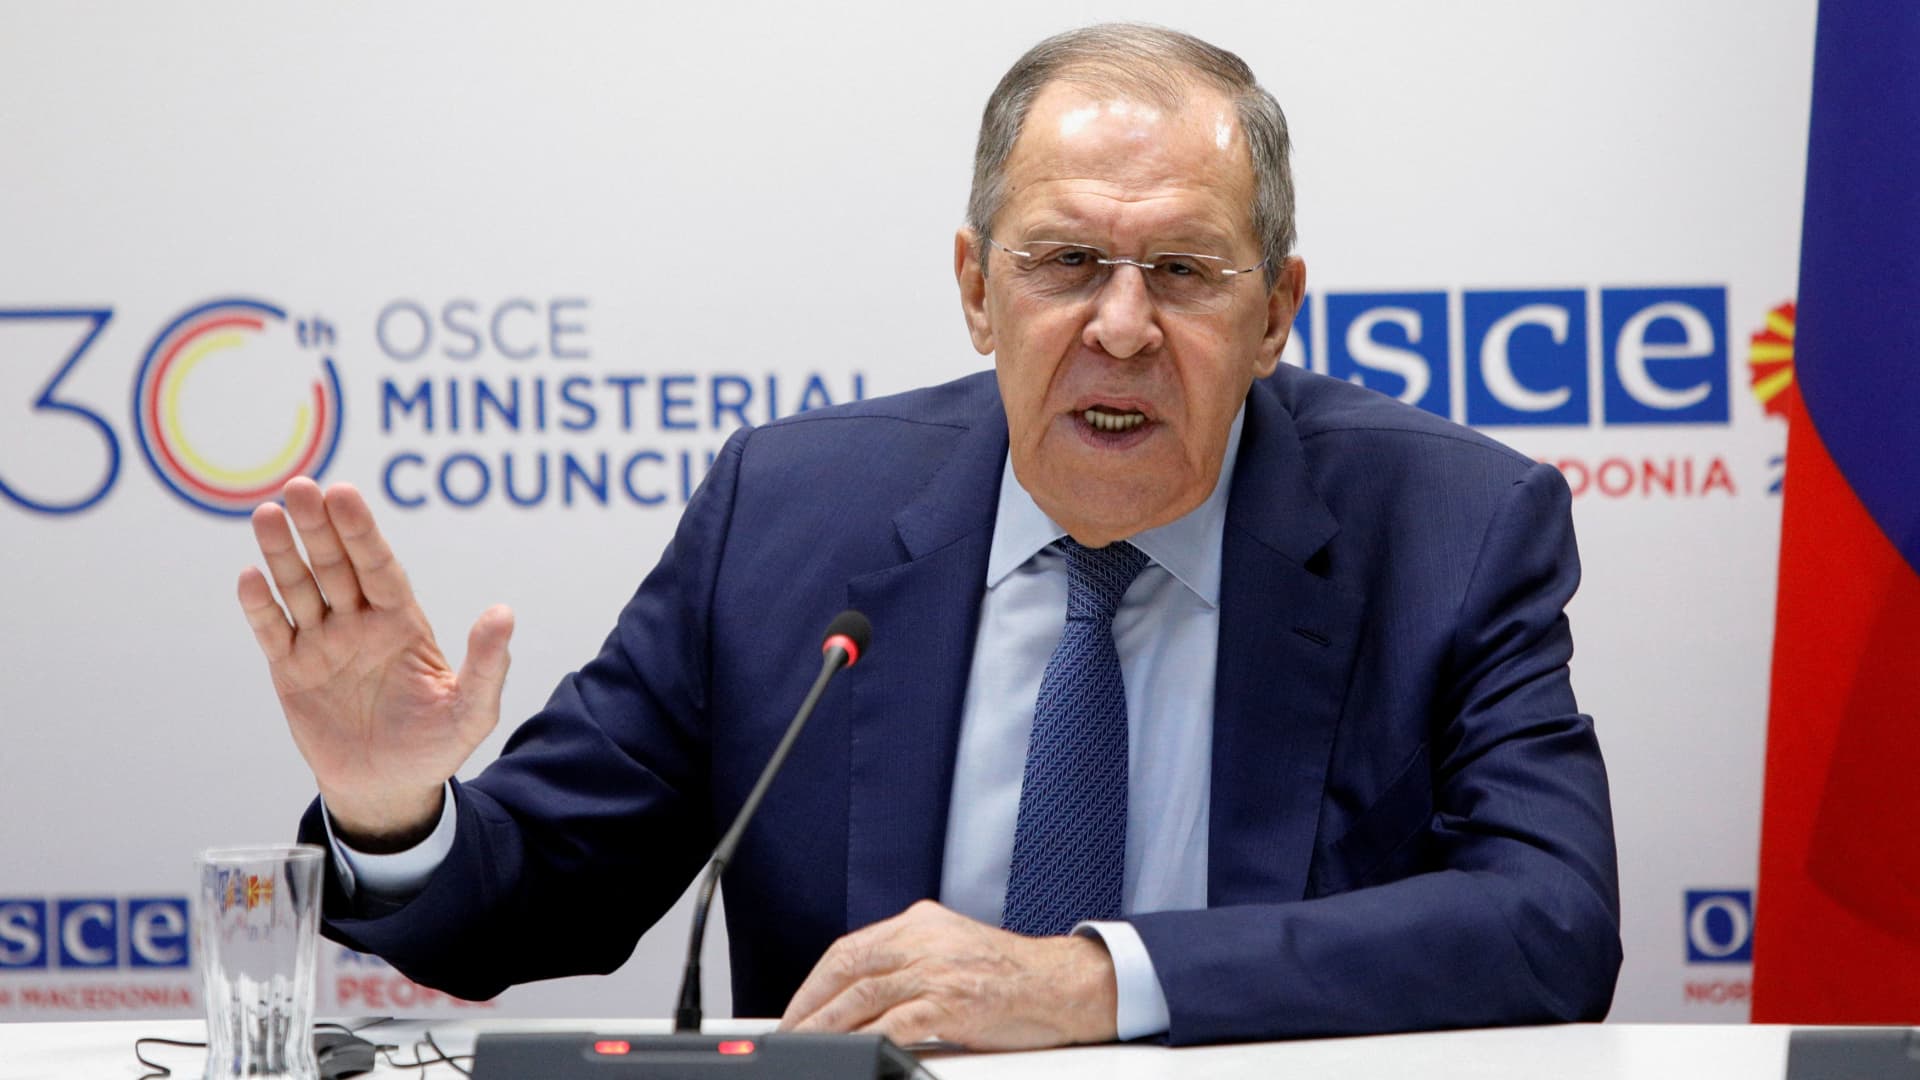 Russia's Lavrov claims the West is shifting strategy on Ukraine